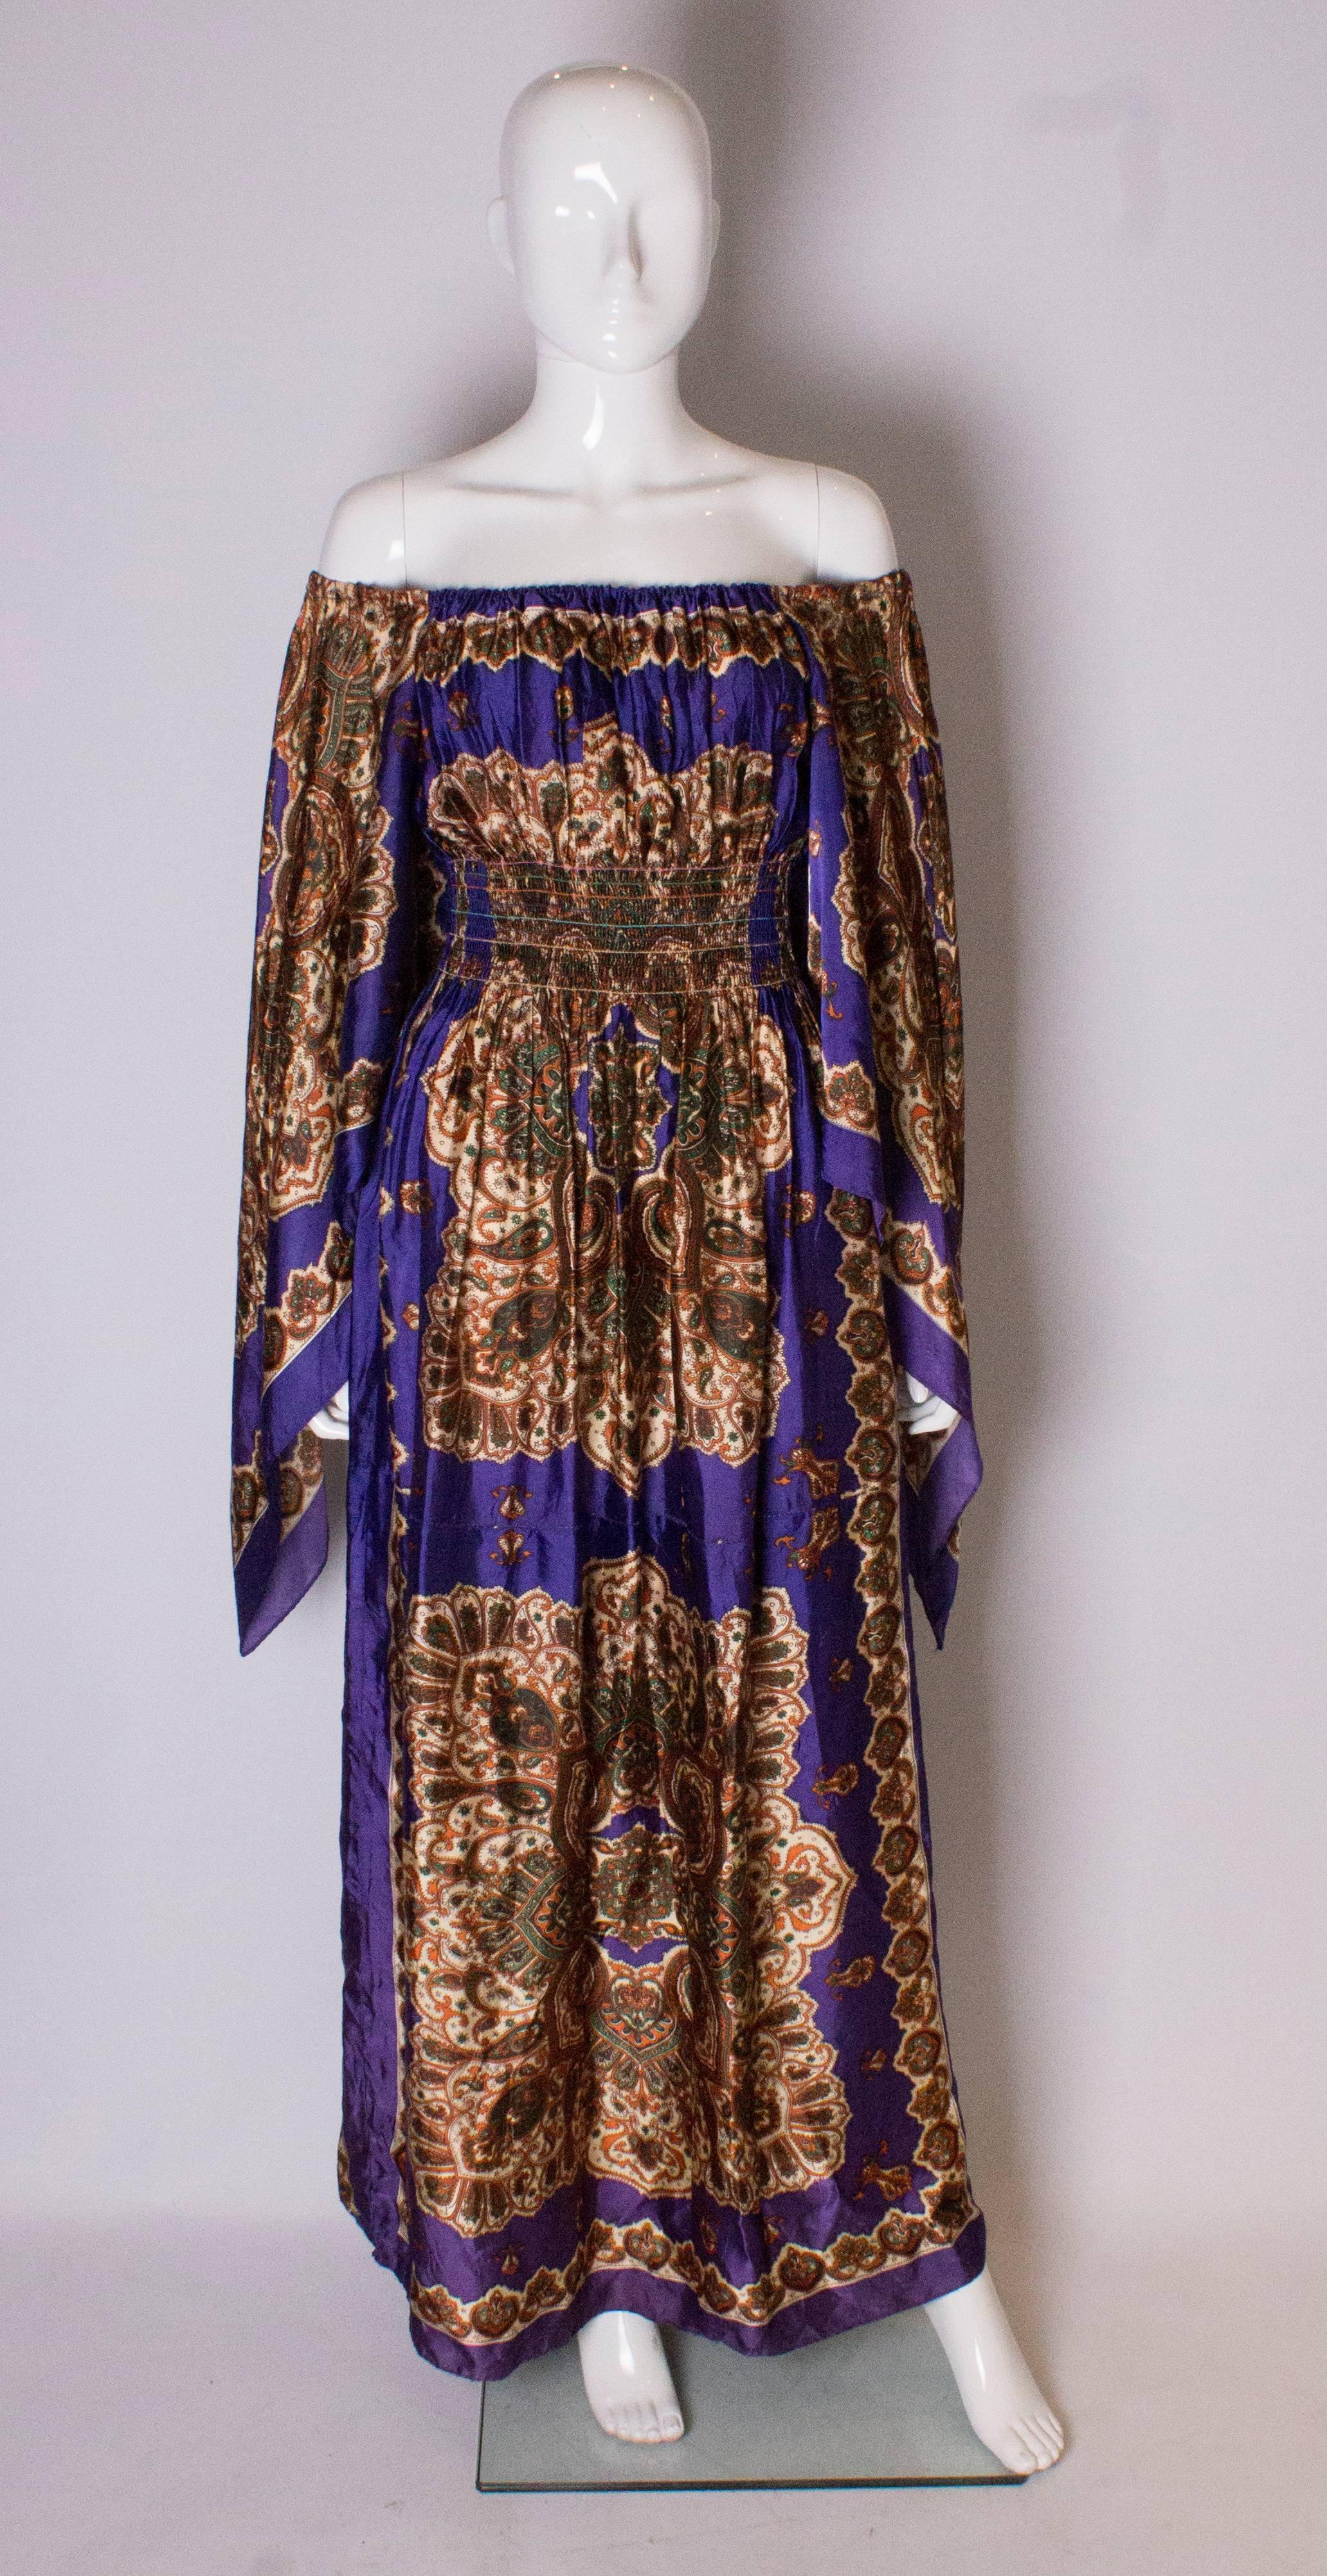 A great boho festival  dress from the 1970s. ,. The dress has an elastic neckline, hankerchief sleaves,  and an elastic waist.,It  is purple in colour with a paisley print.